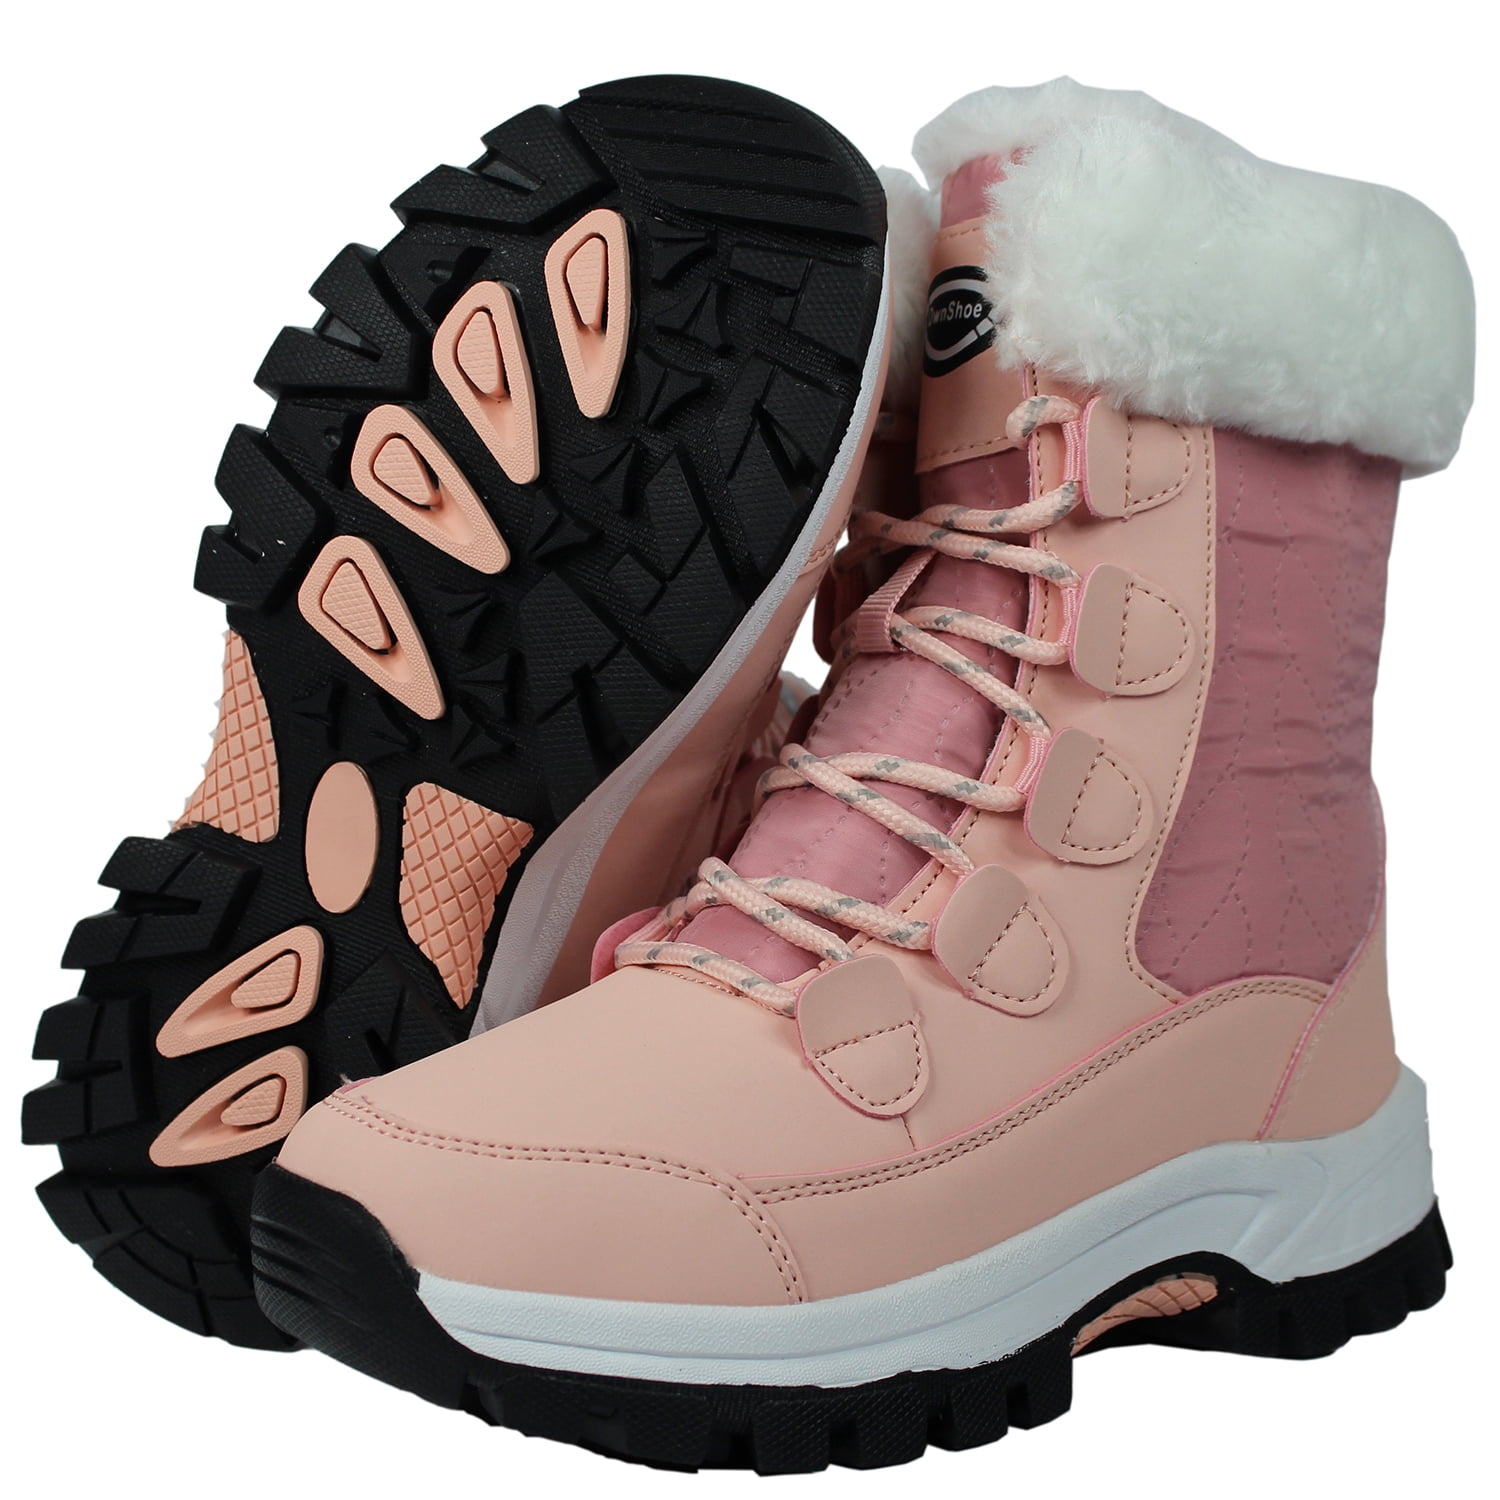 water resistant snow boots